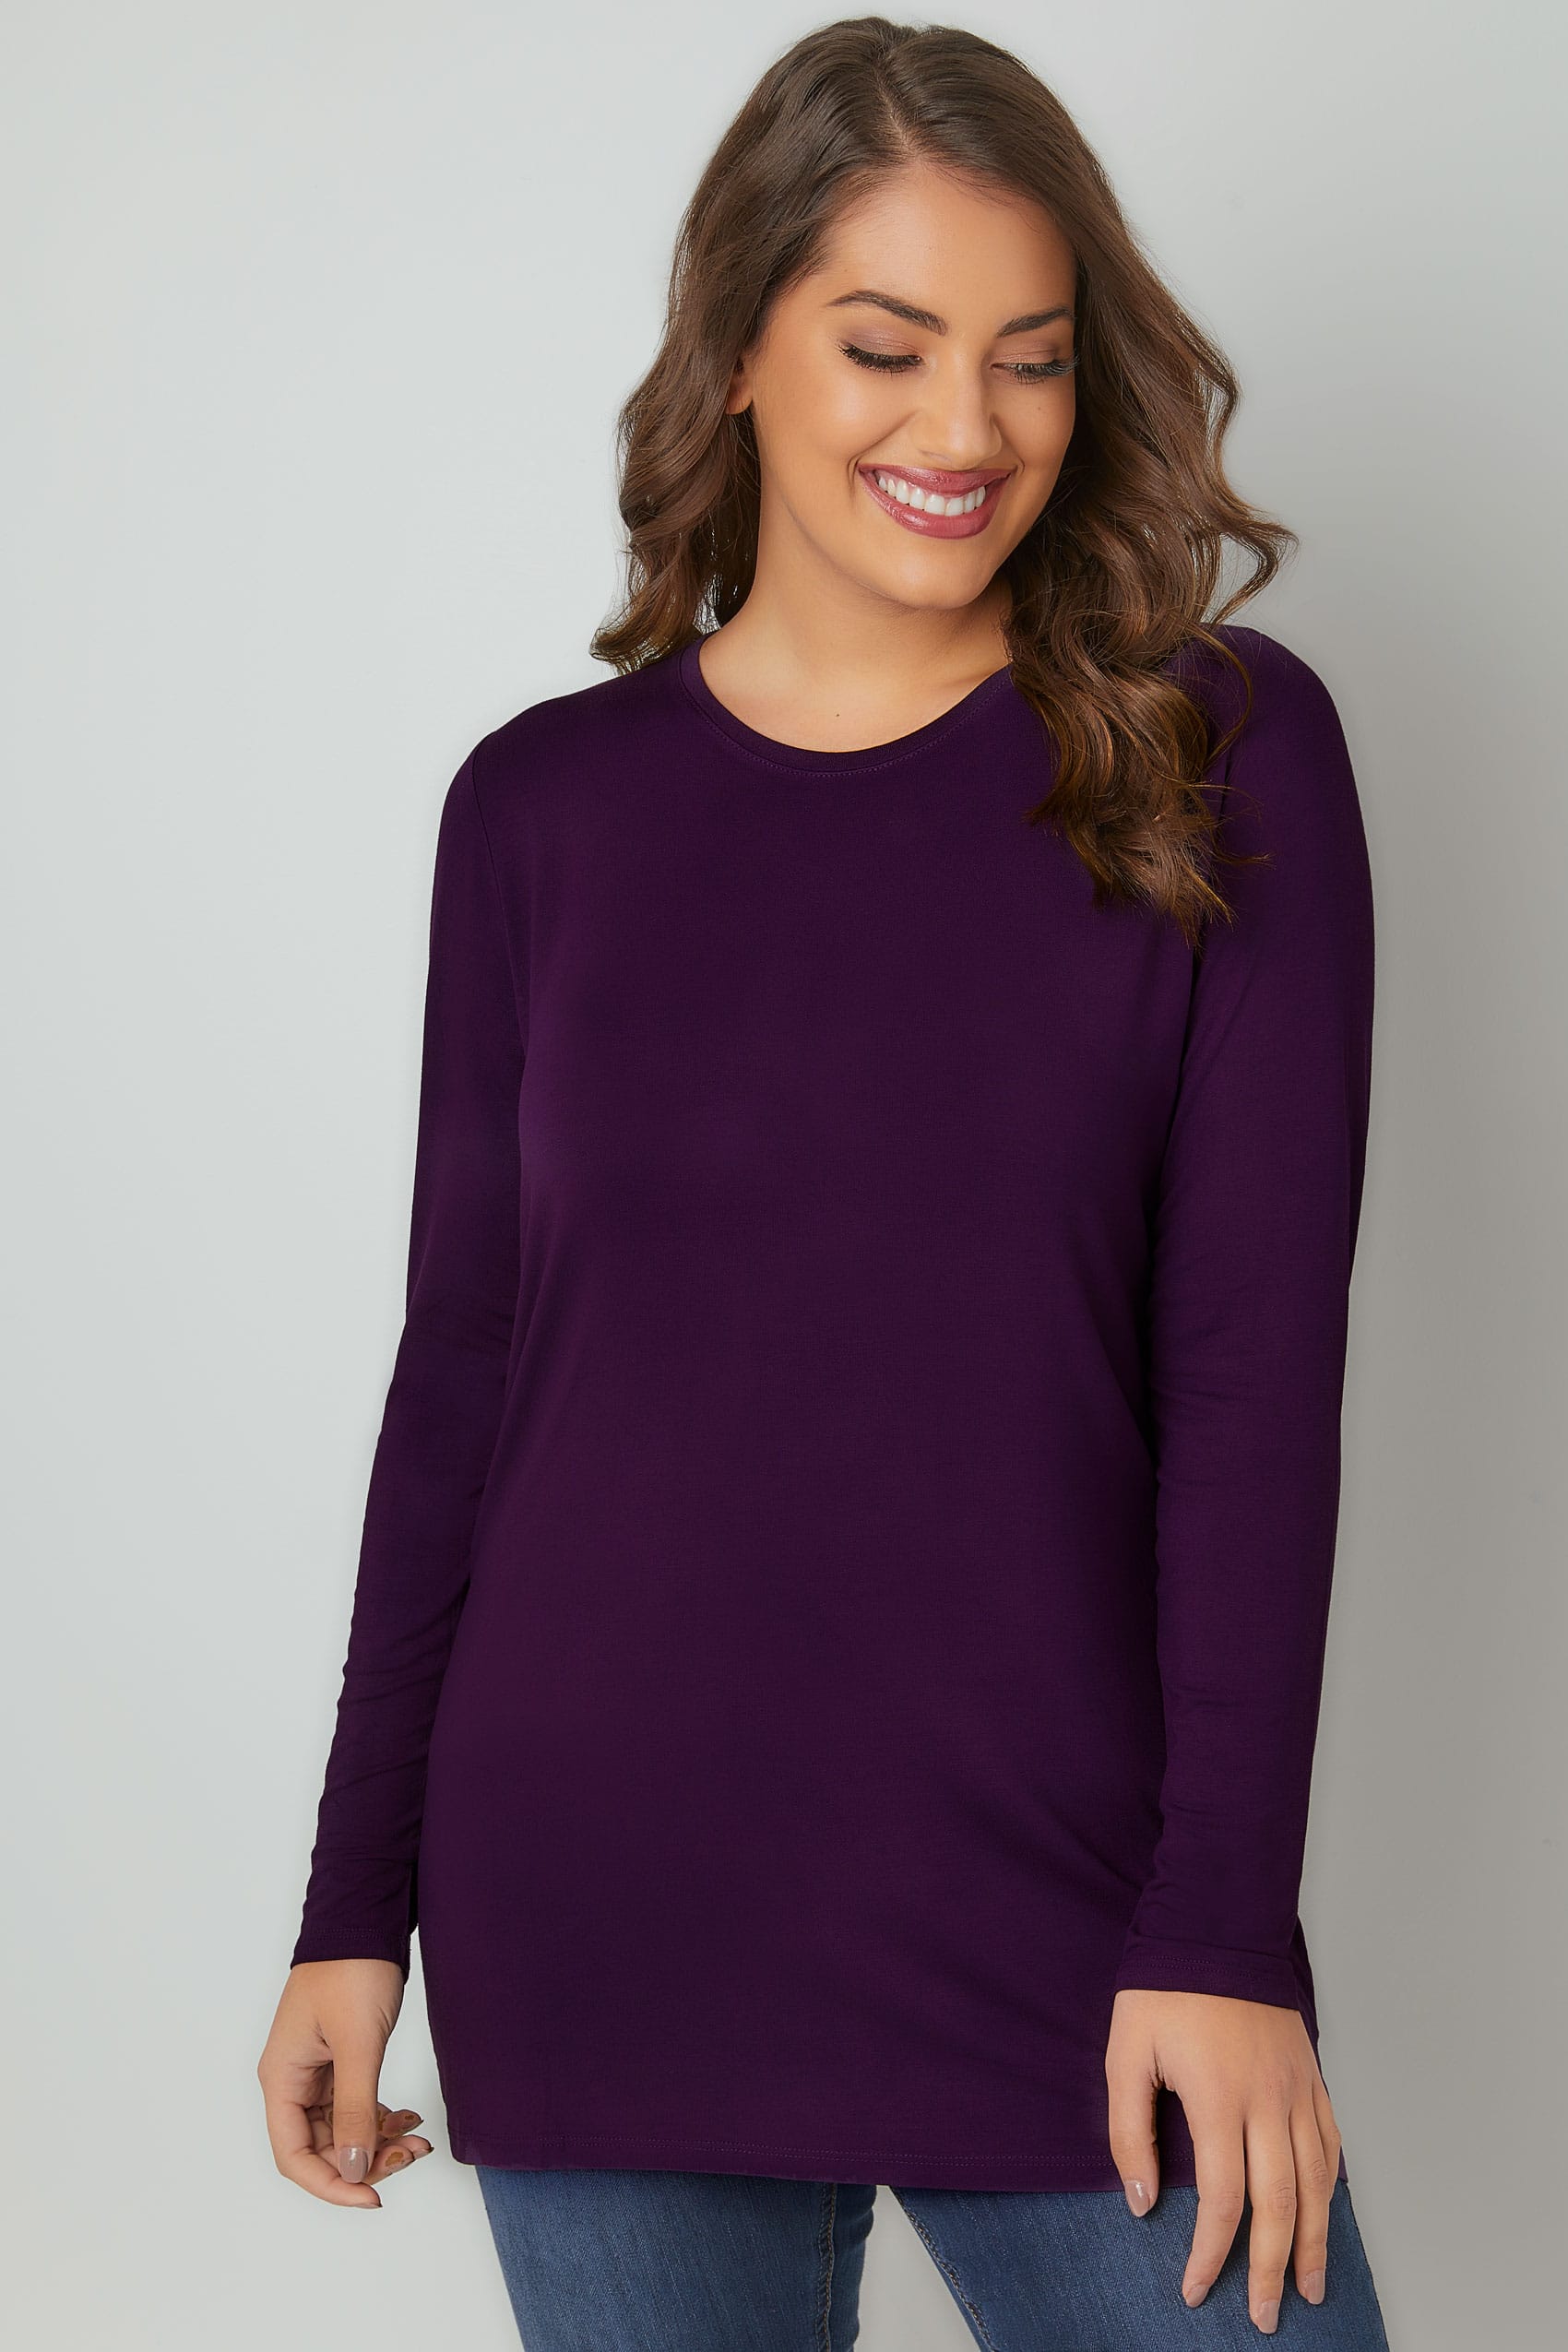 Purple Long Sleeve Soft Touch Jersey Top, Plus size 16 to 36